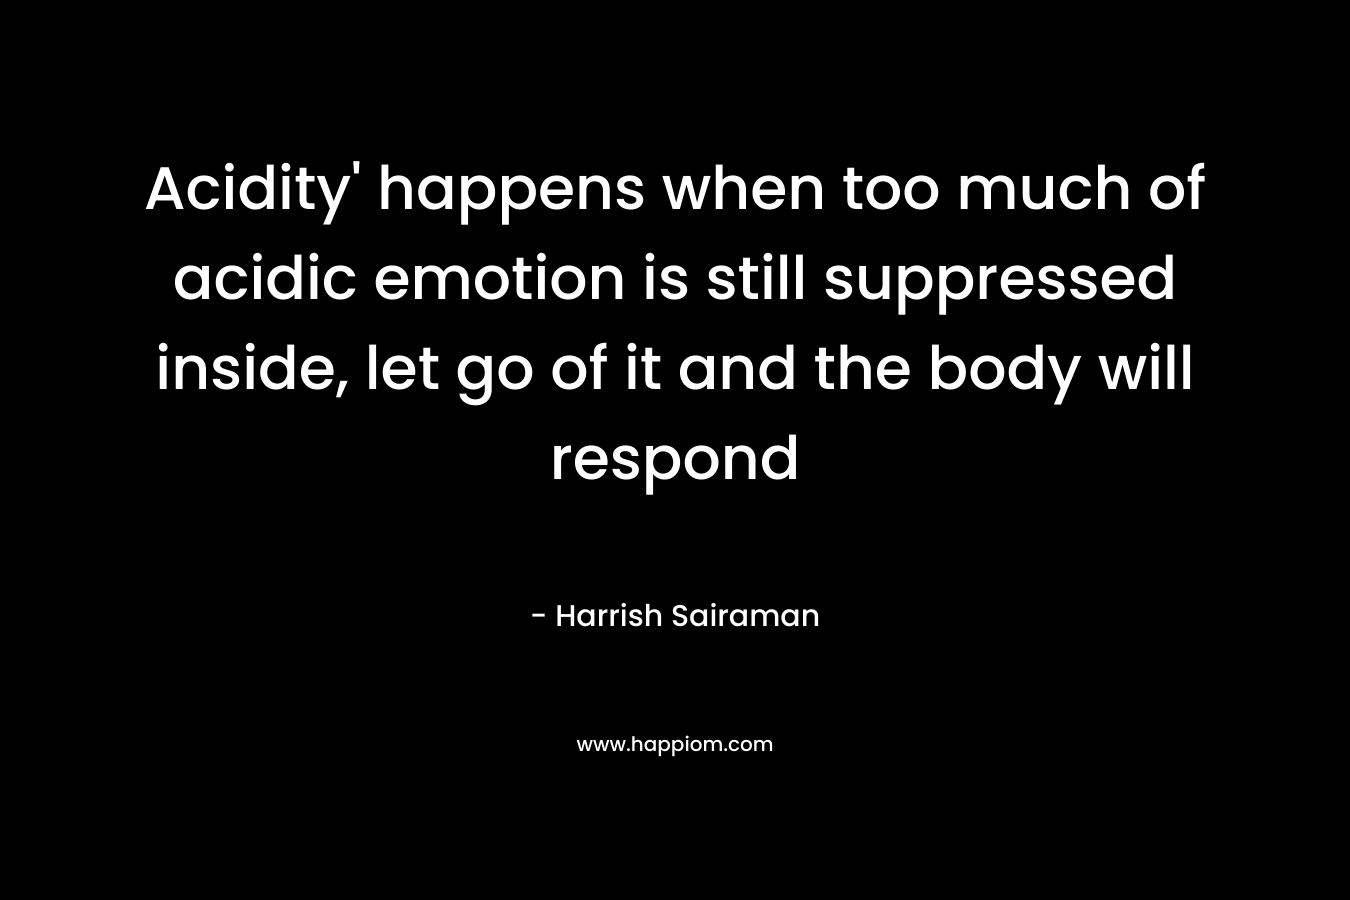 Acidity' happens when too much of acidic emotion is still suppressed inside, let go of it and the body will respond